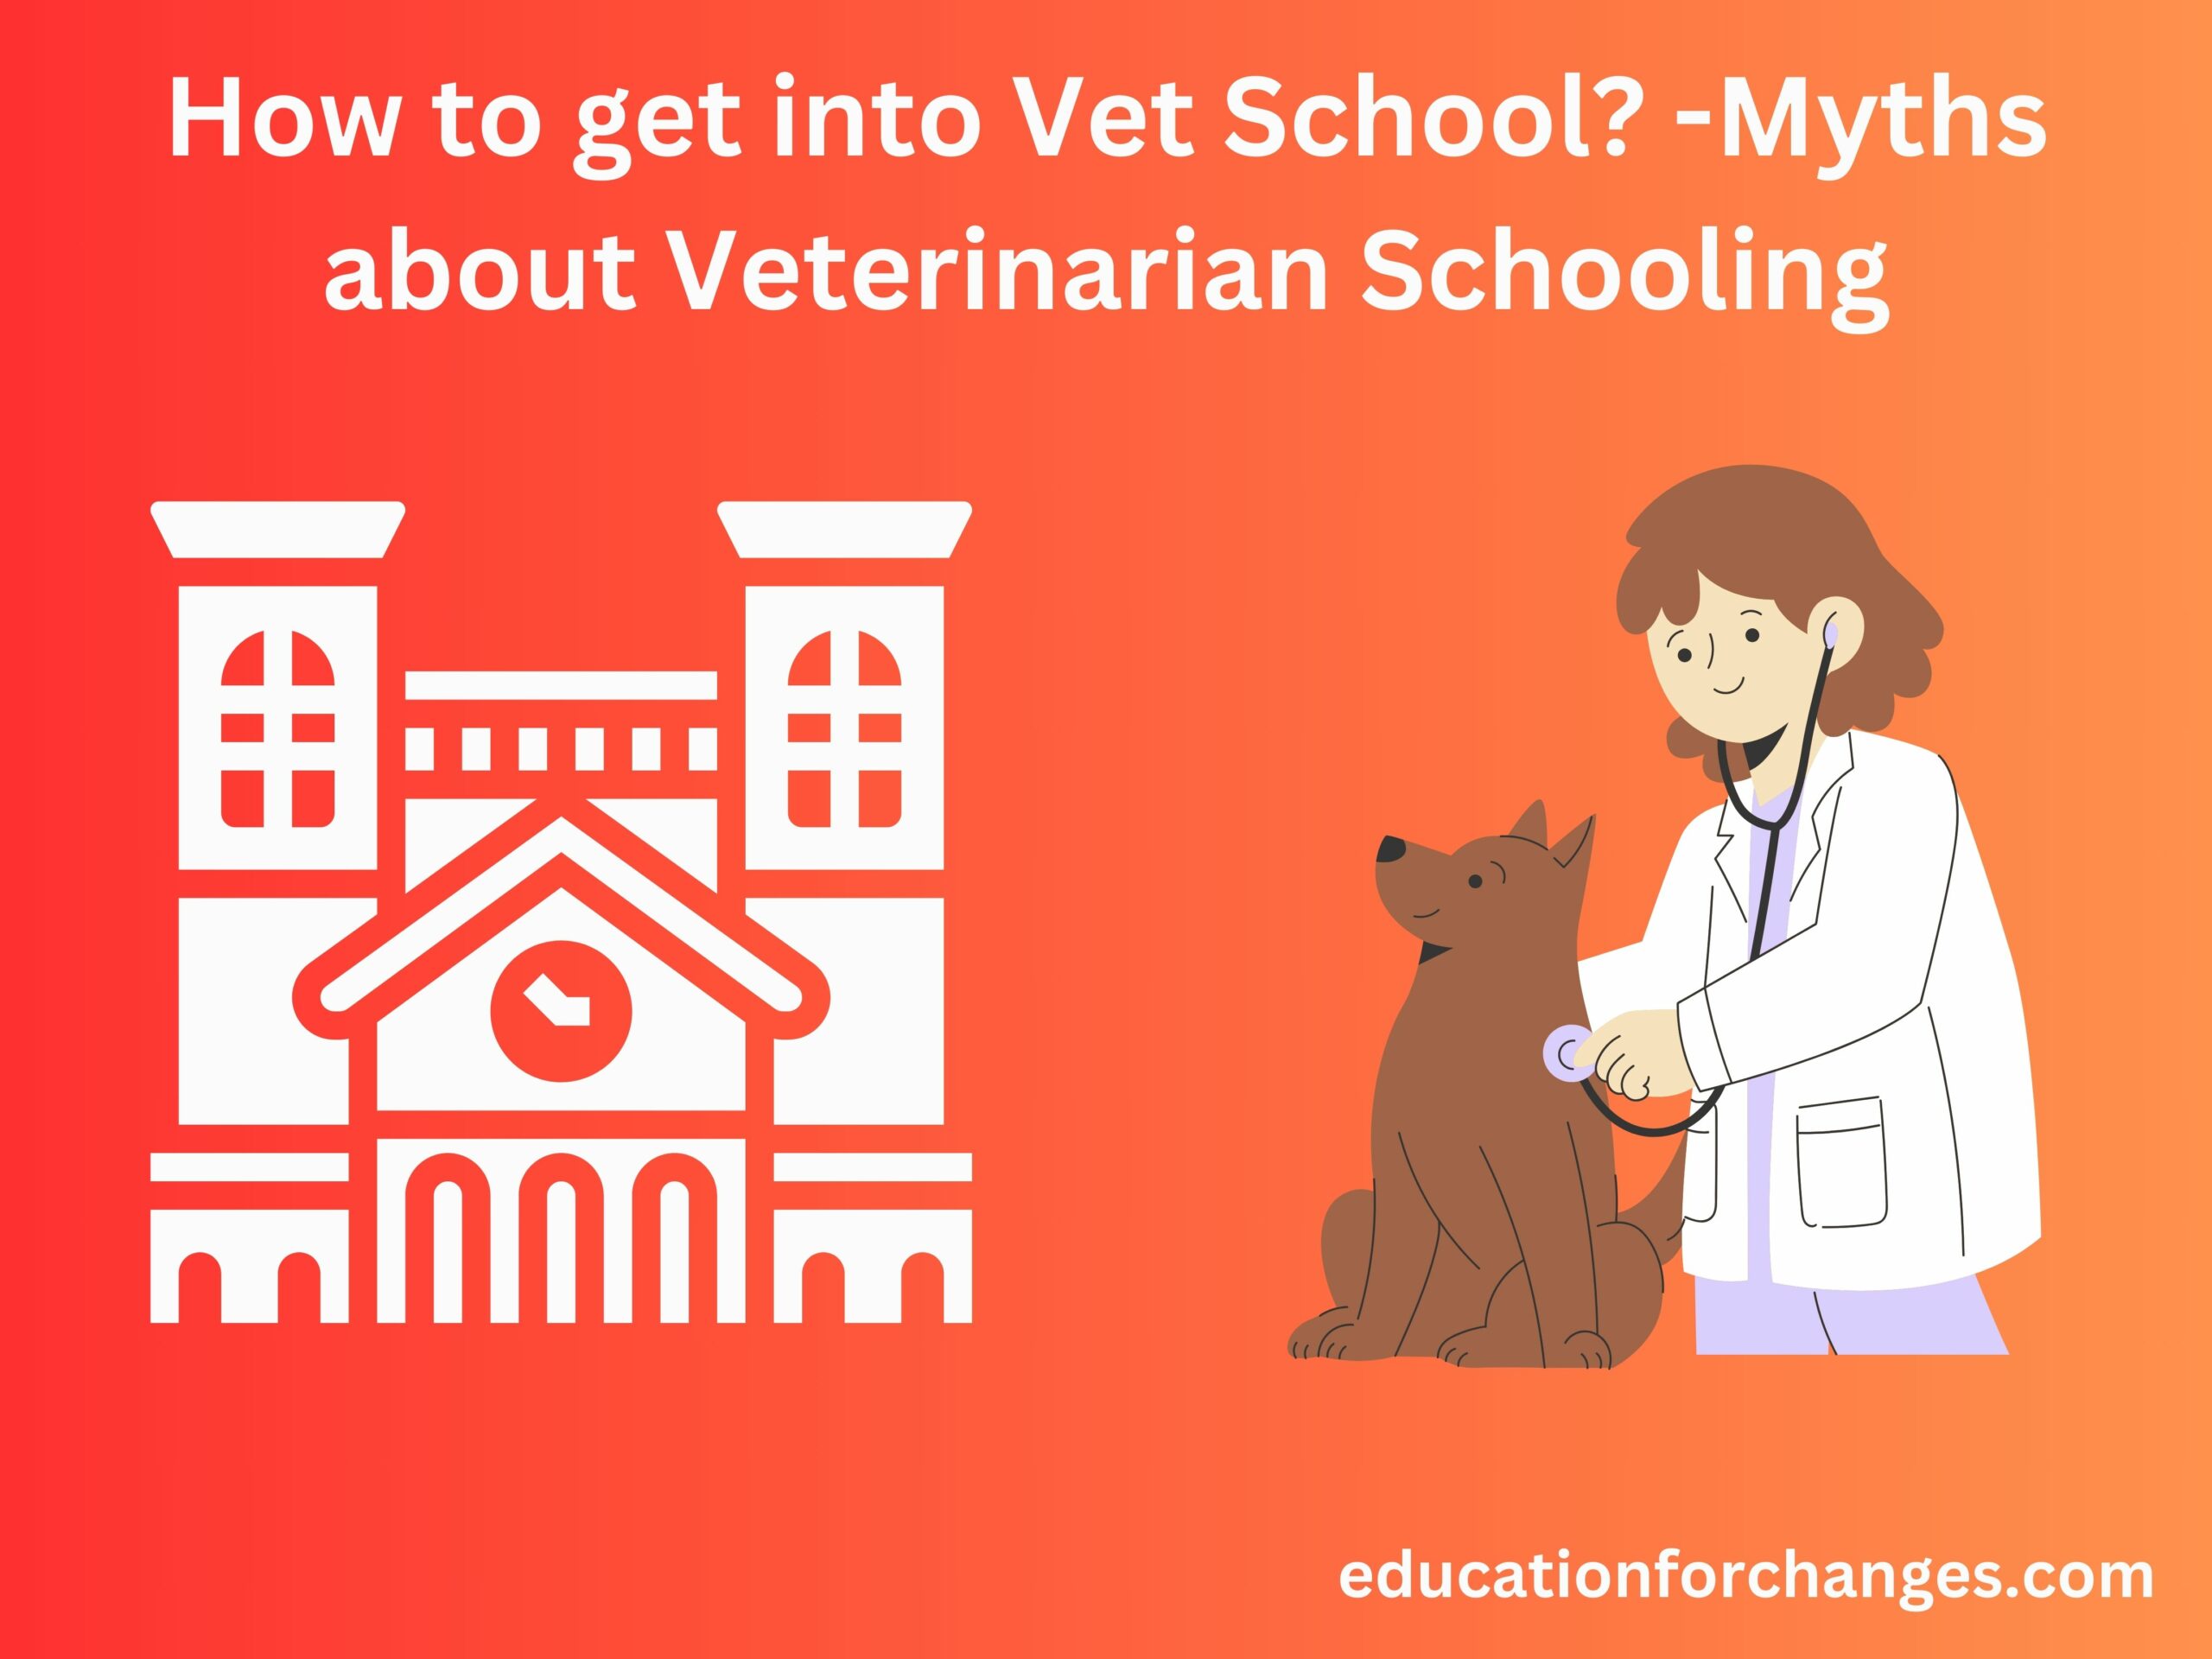 How to get into Vet School? -Myths about Veterinarian Schooling